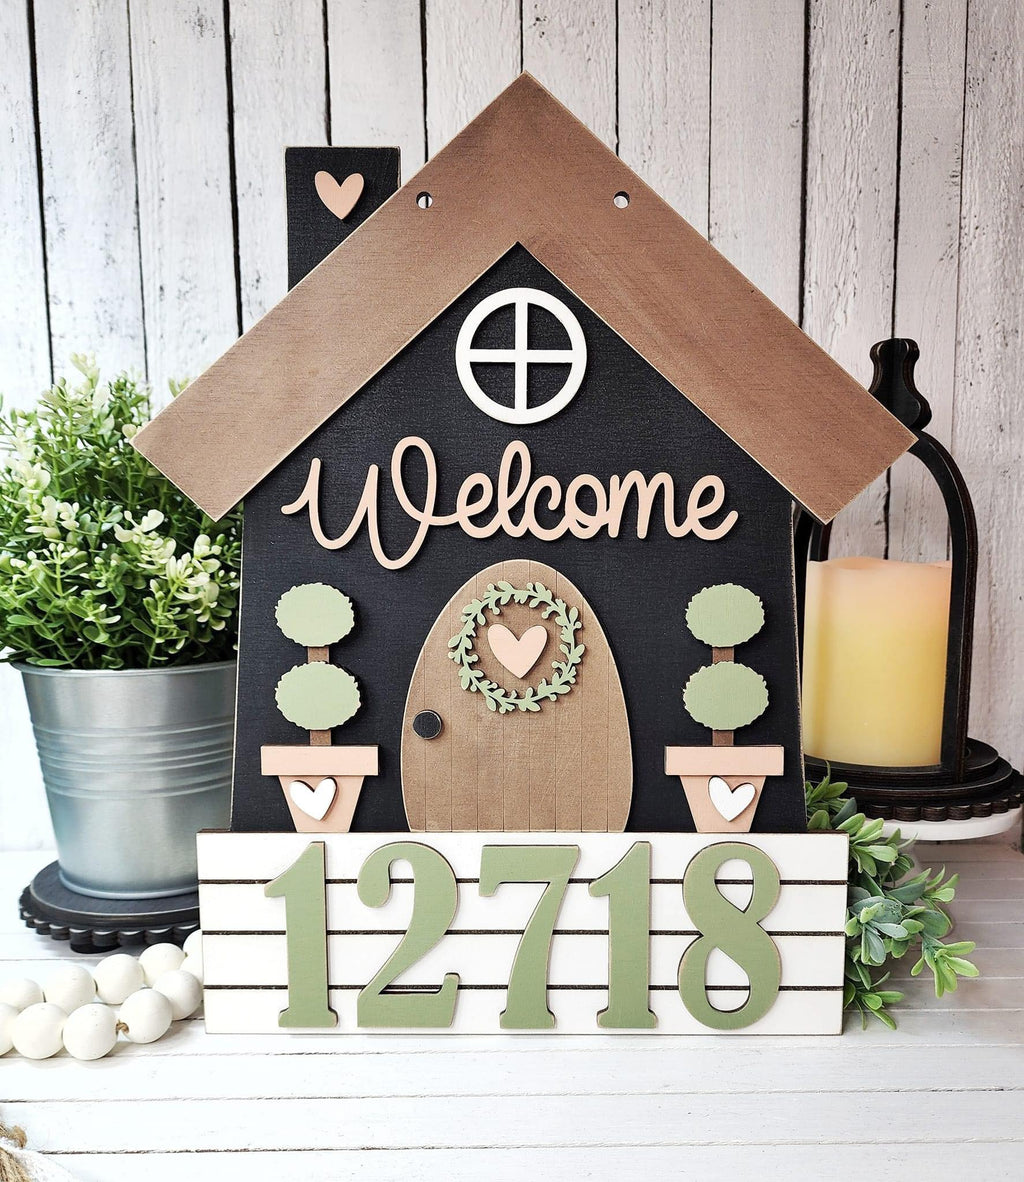 3D Home - Welcome with House Number